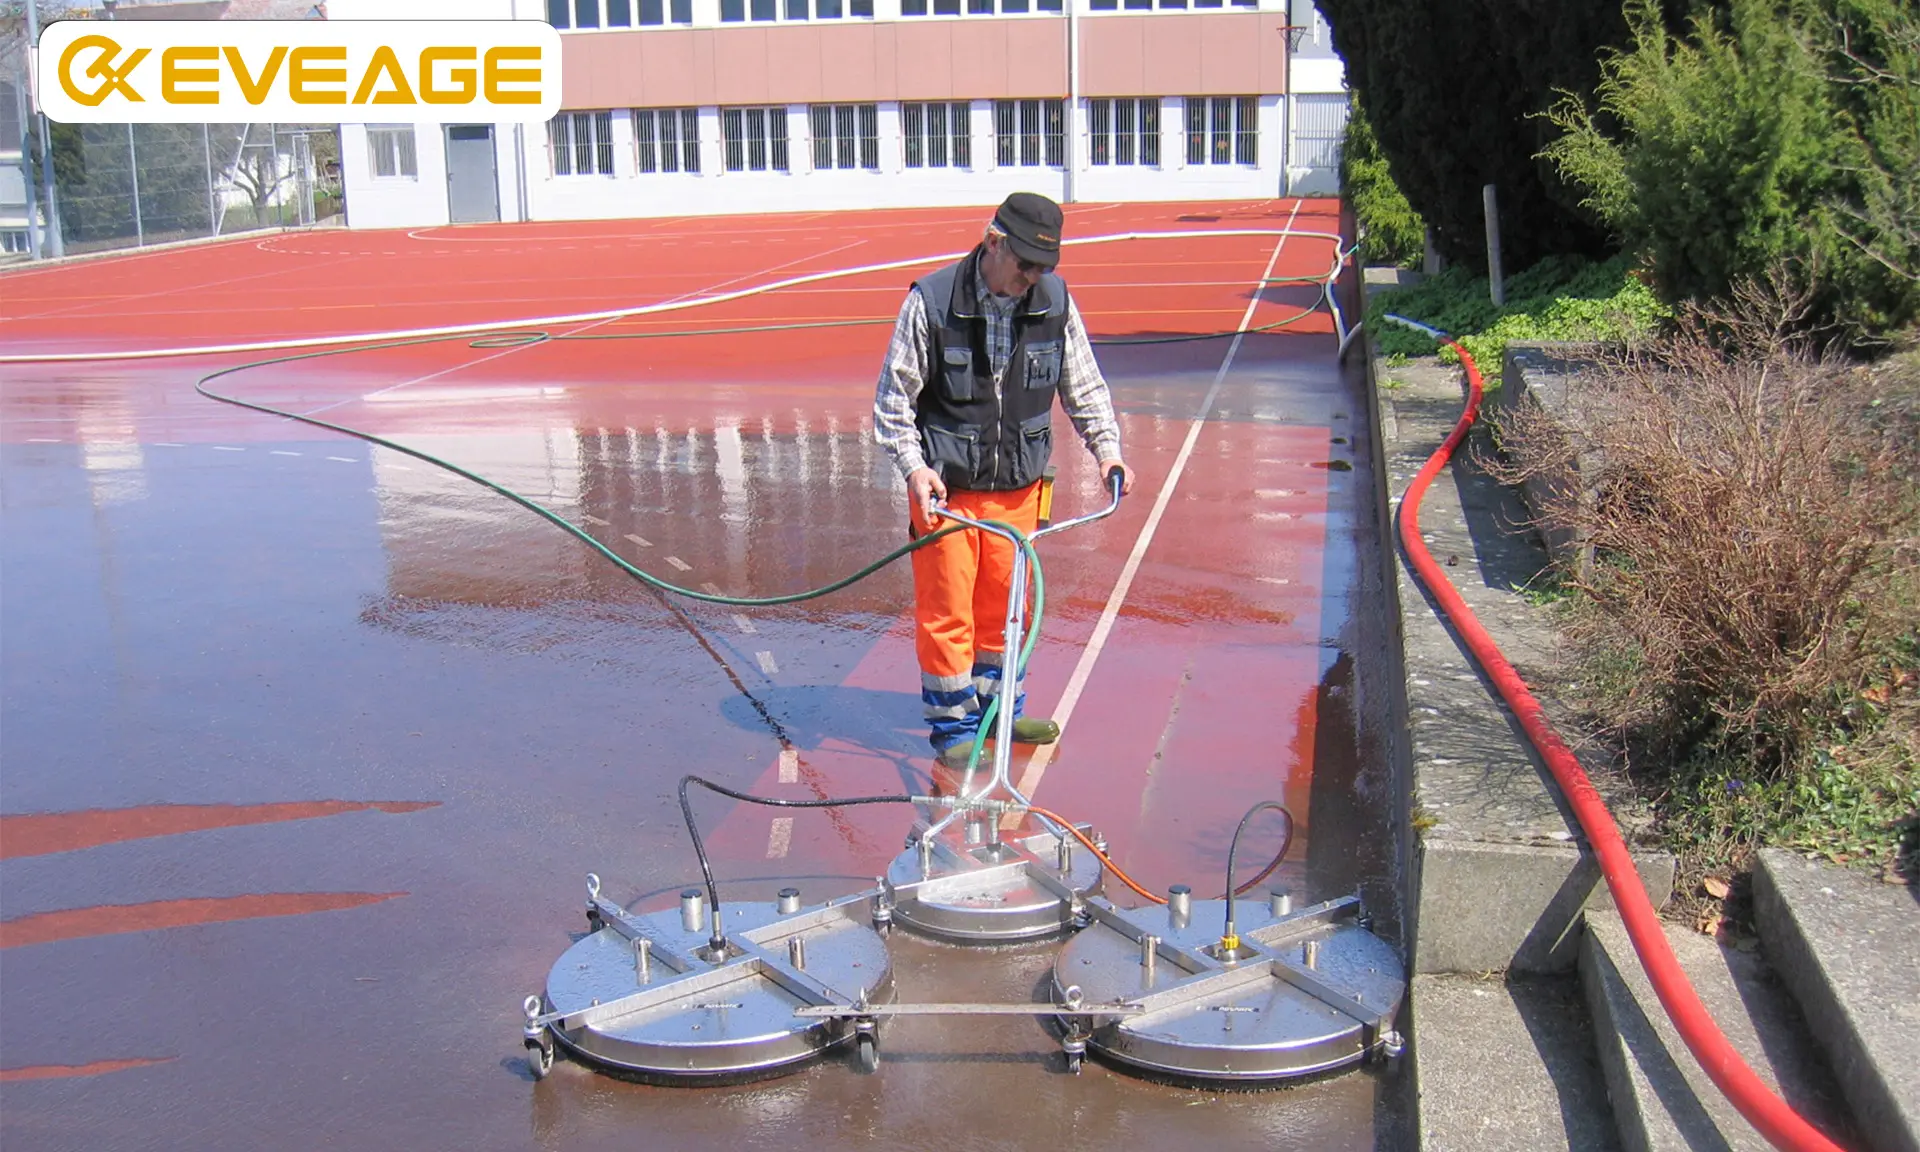 rotating surface cleaner by Eveage